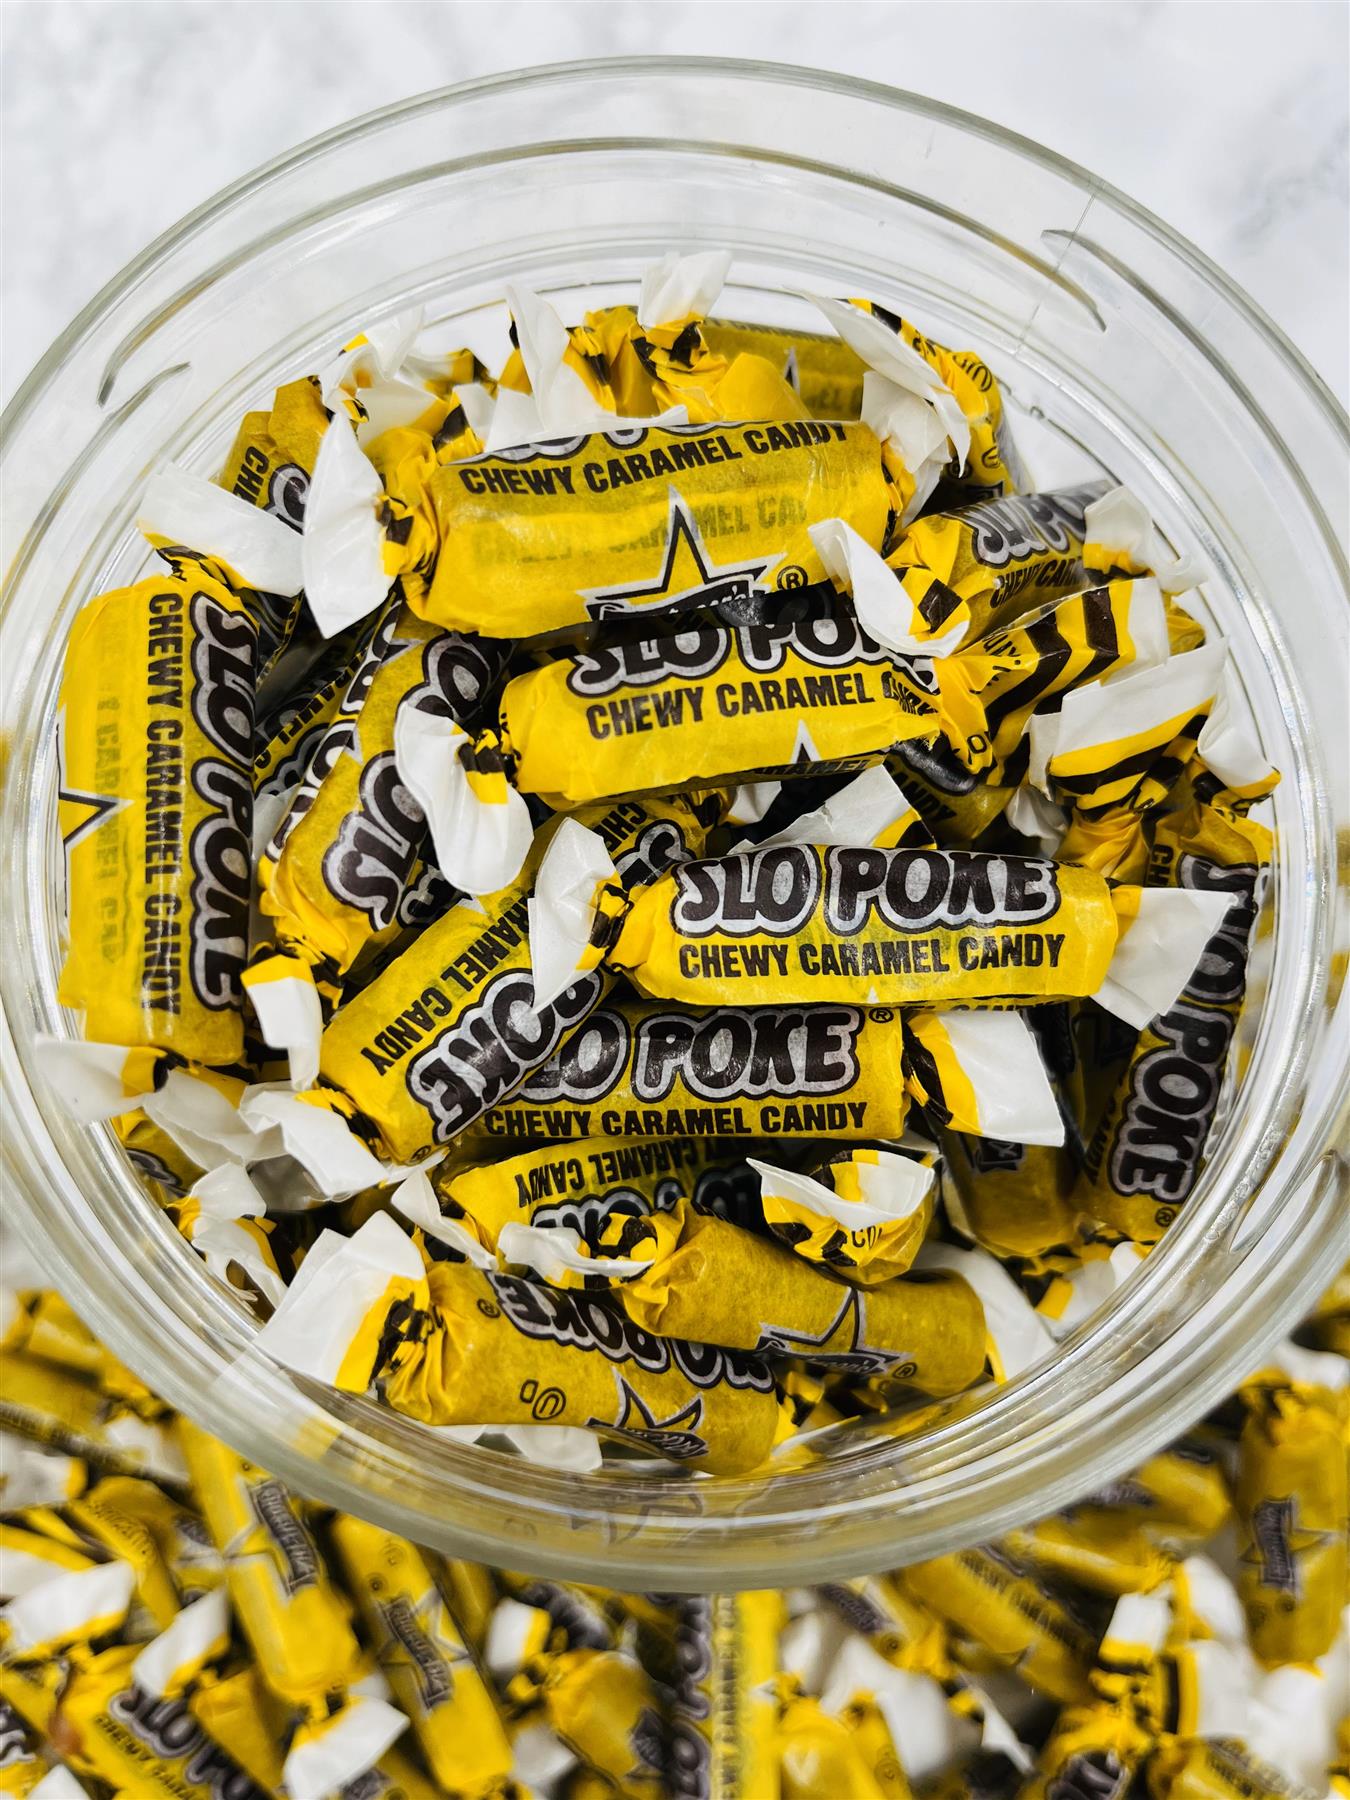 Simway Sweets Jar 695g - Slo Poke - Individually Wrapped American Sweets - Approximately 138 Pieces